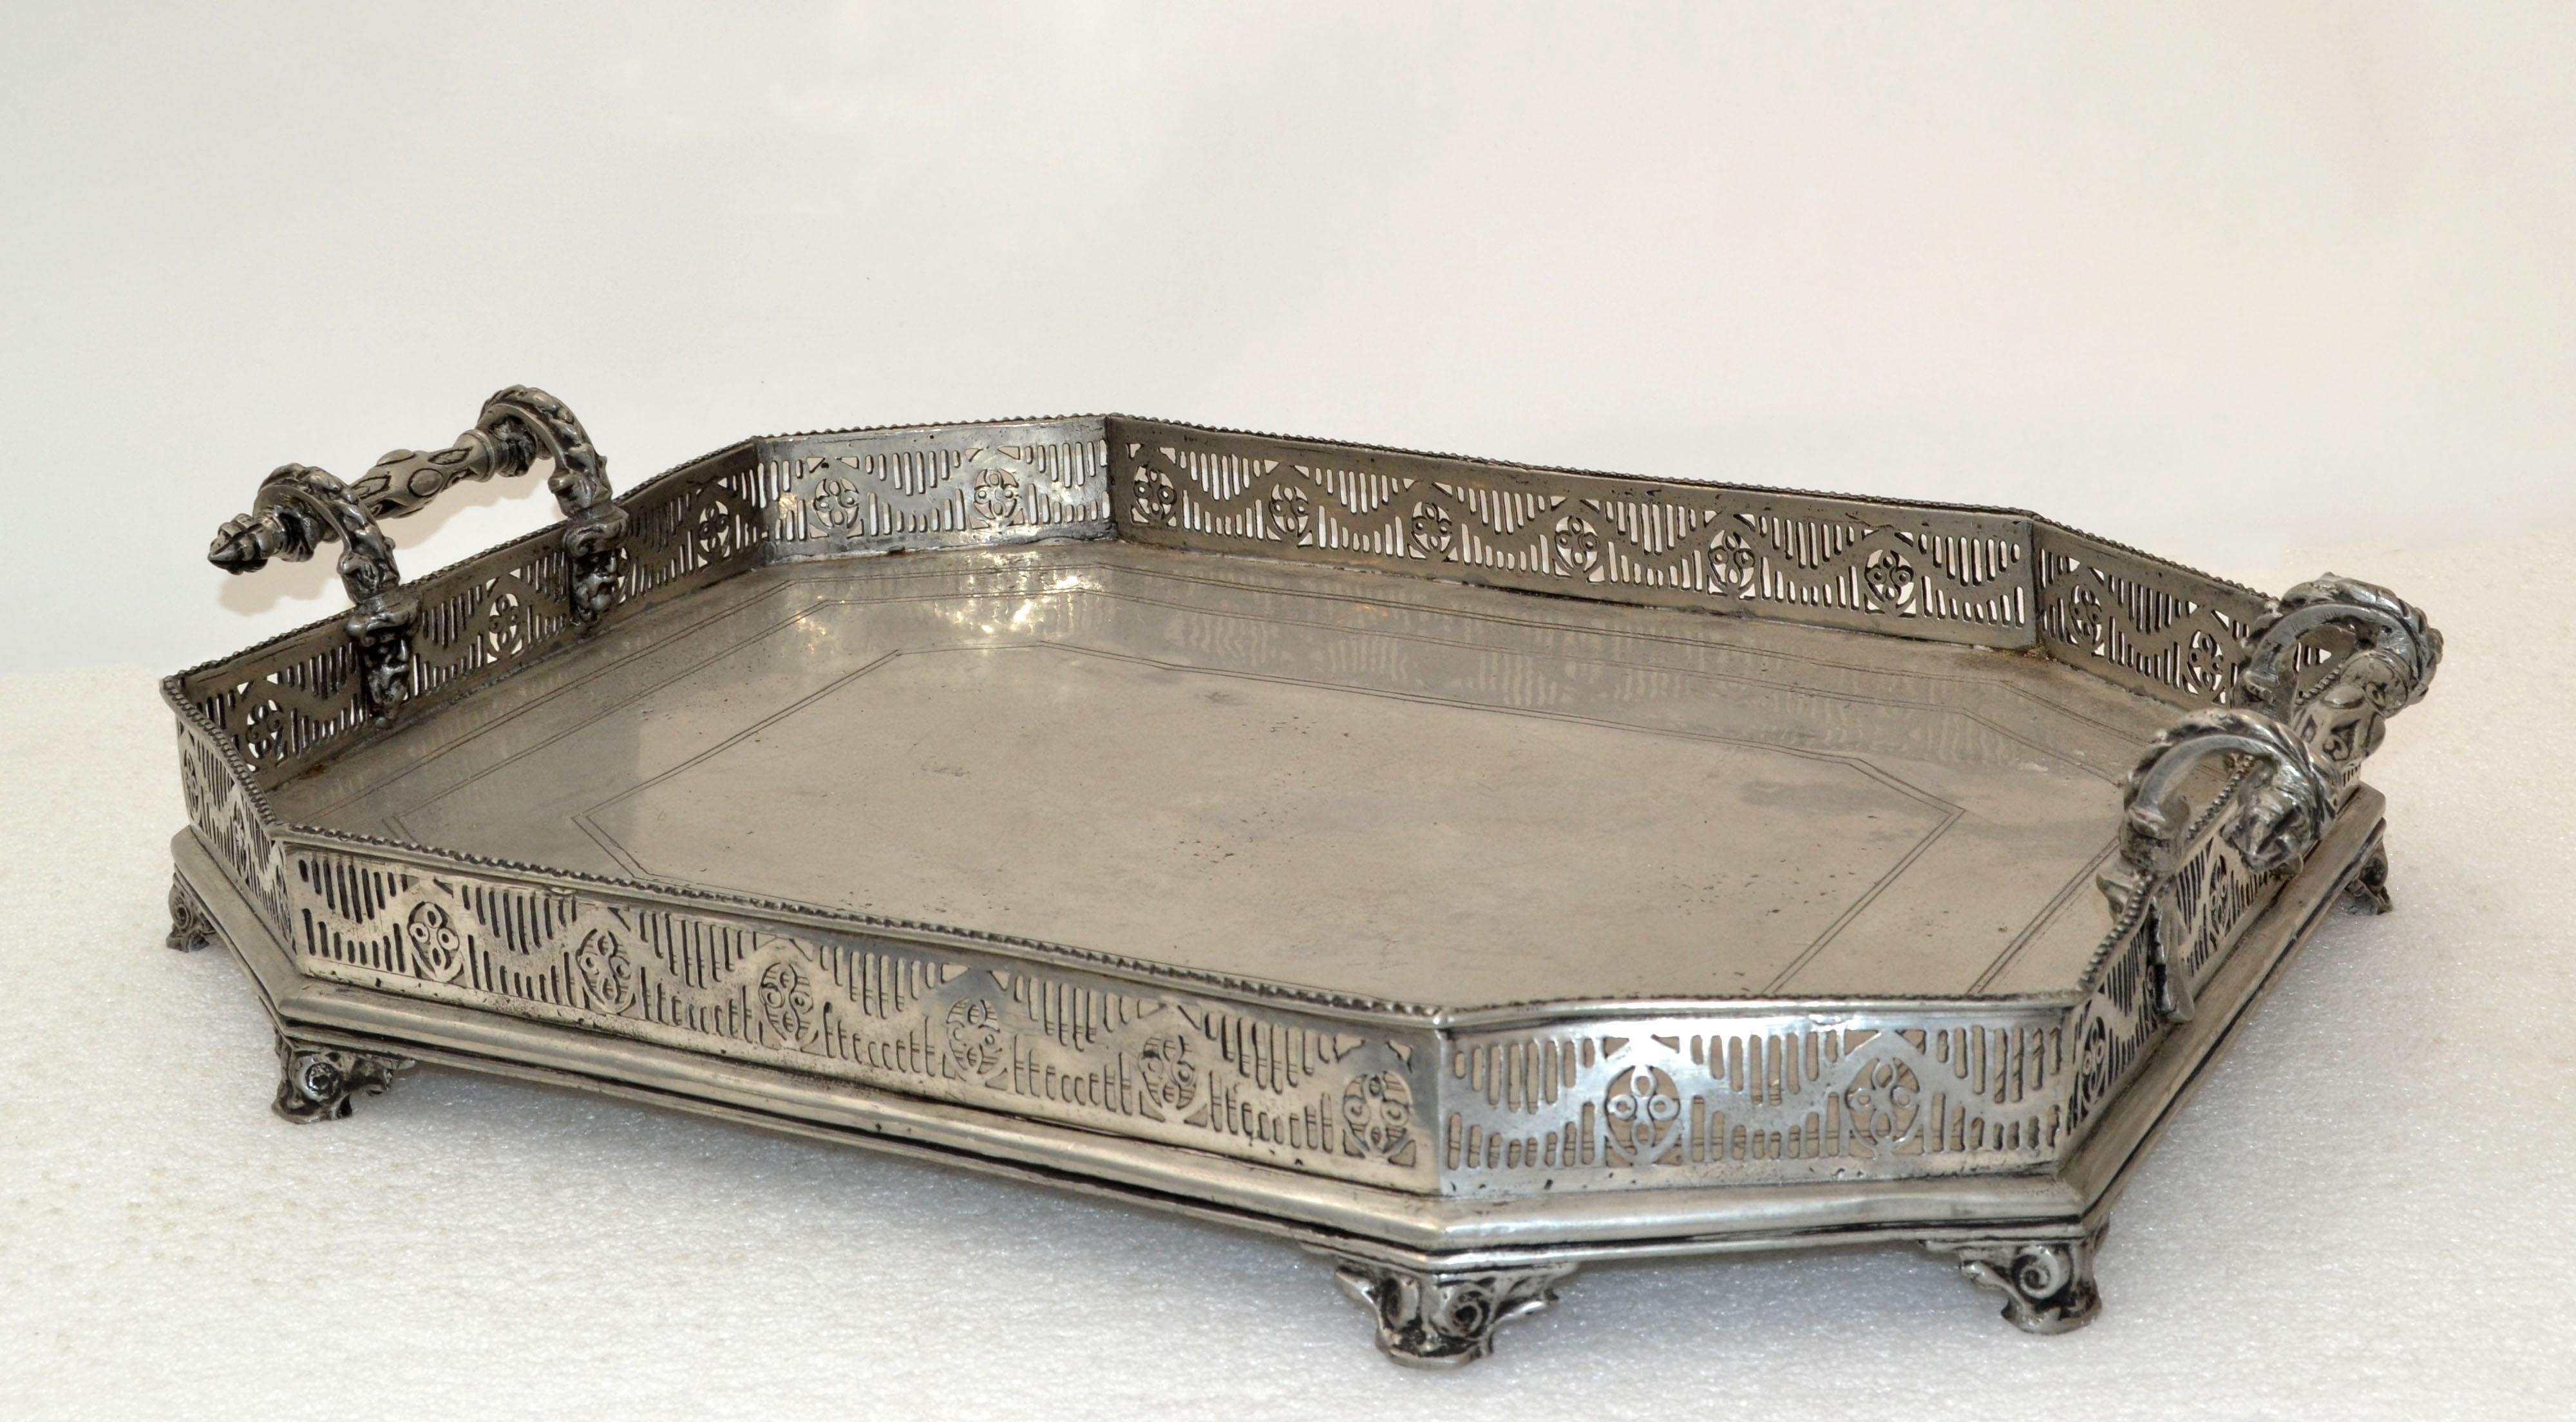 Spanish Silver Ornate Large Footed Serving Tray with Handles Trademark 5